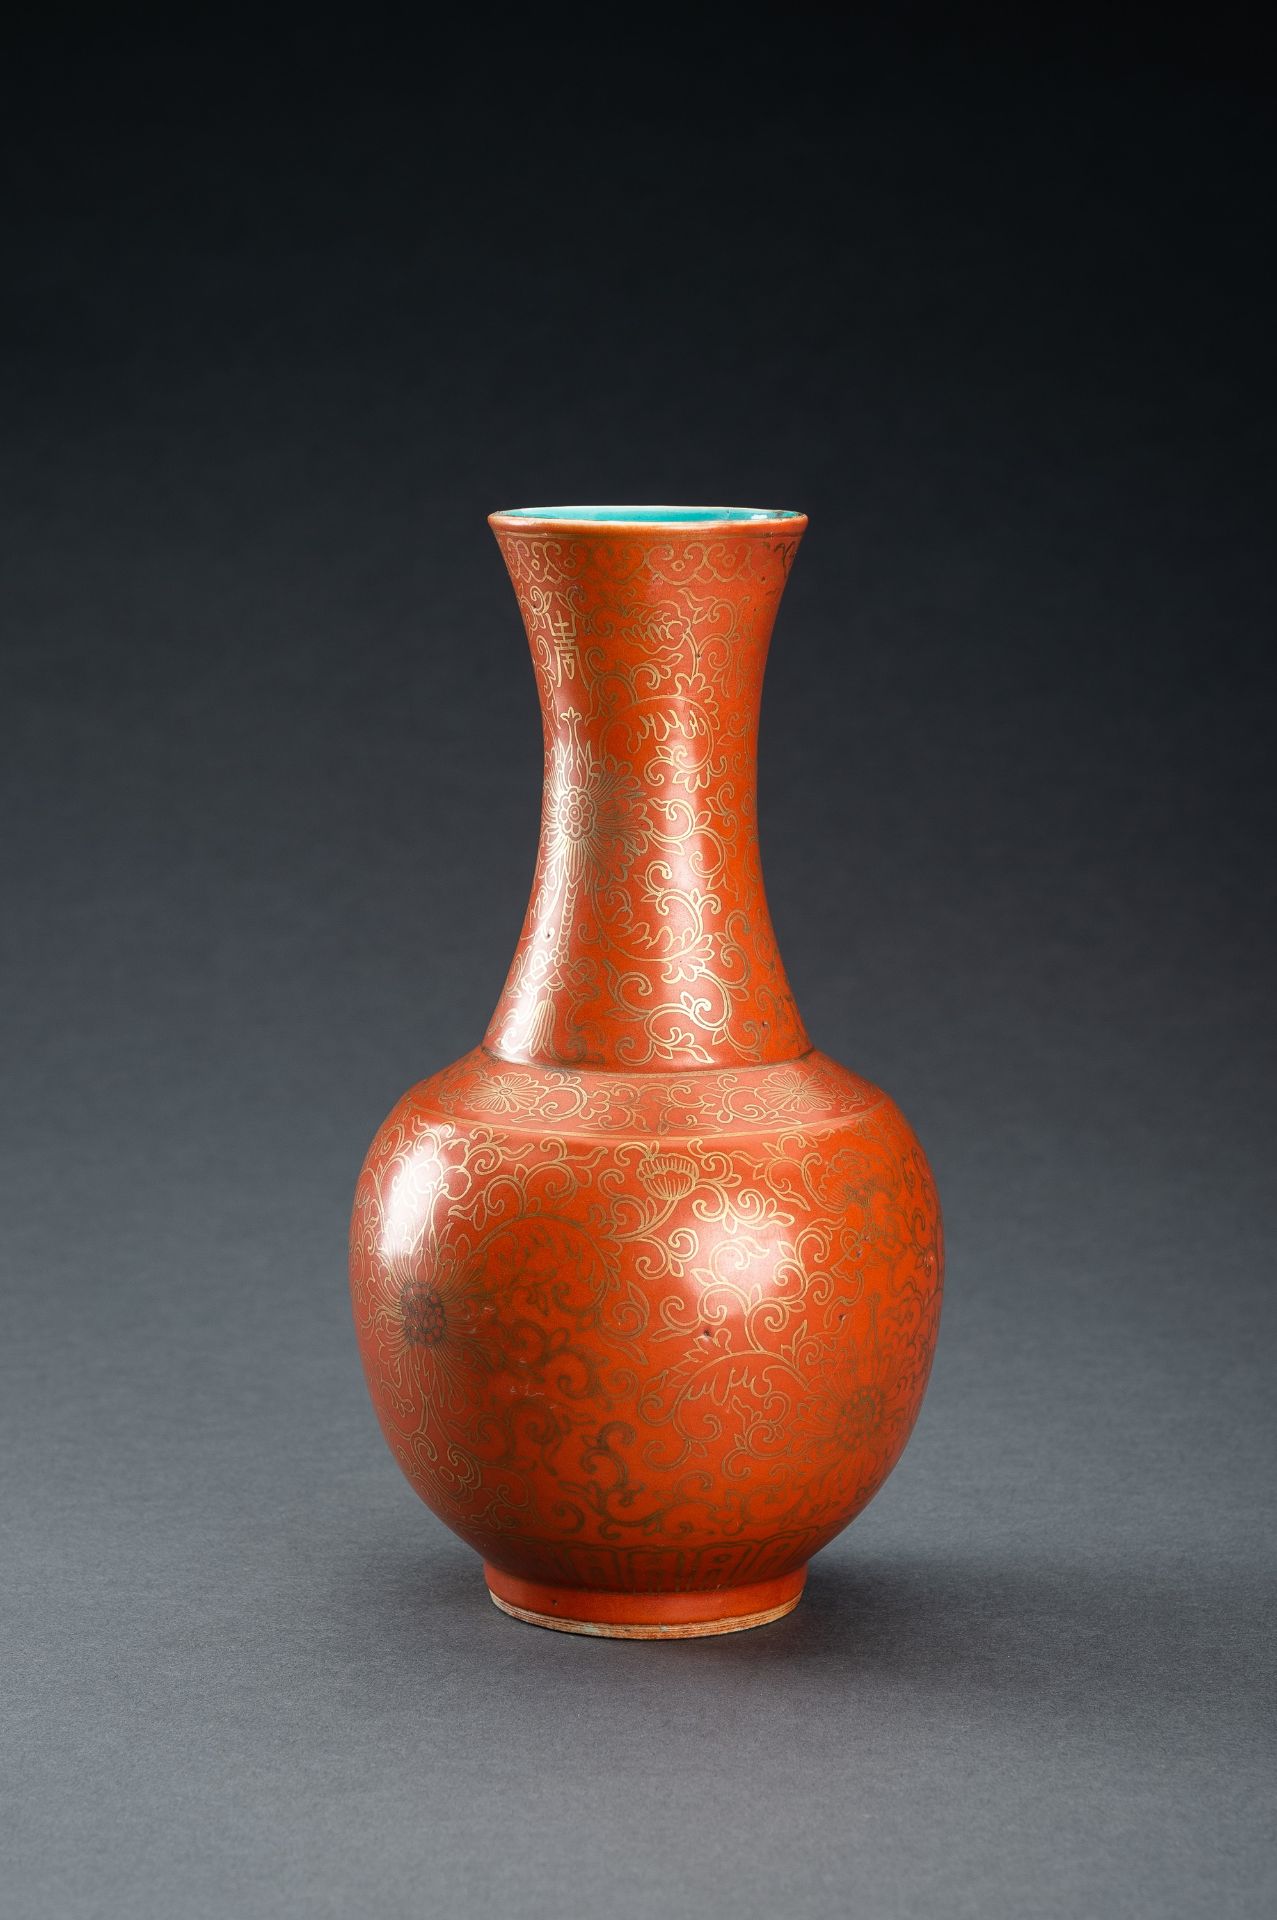 A GOLD PAINTED CORAL-GORUND BOTTLE VASE, REPUBLIC PERIOD - Image 3 of 13